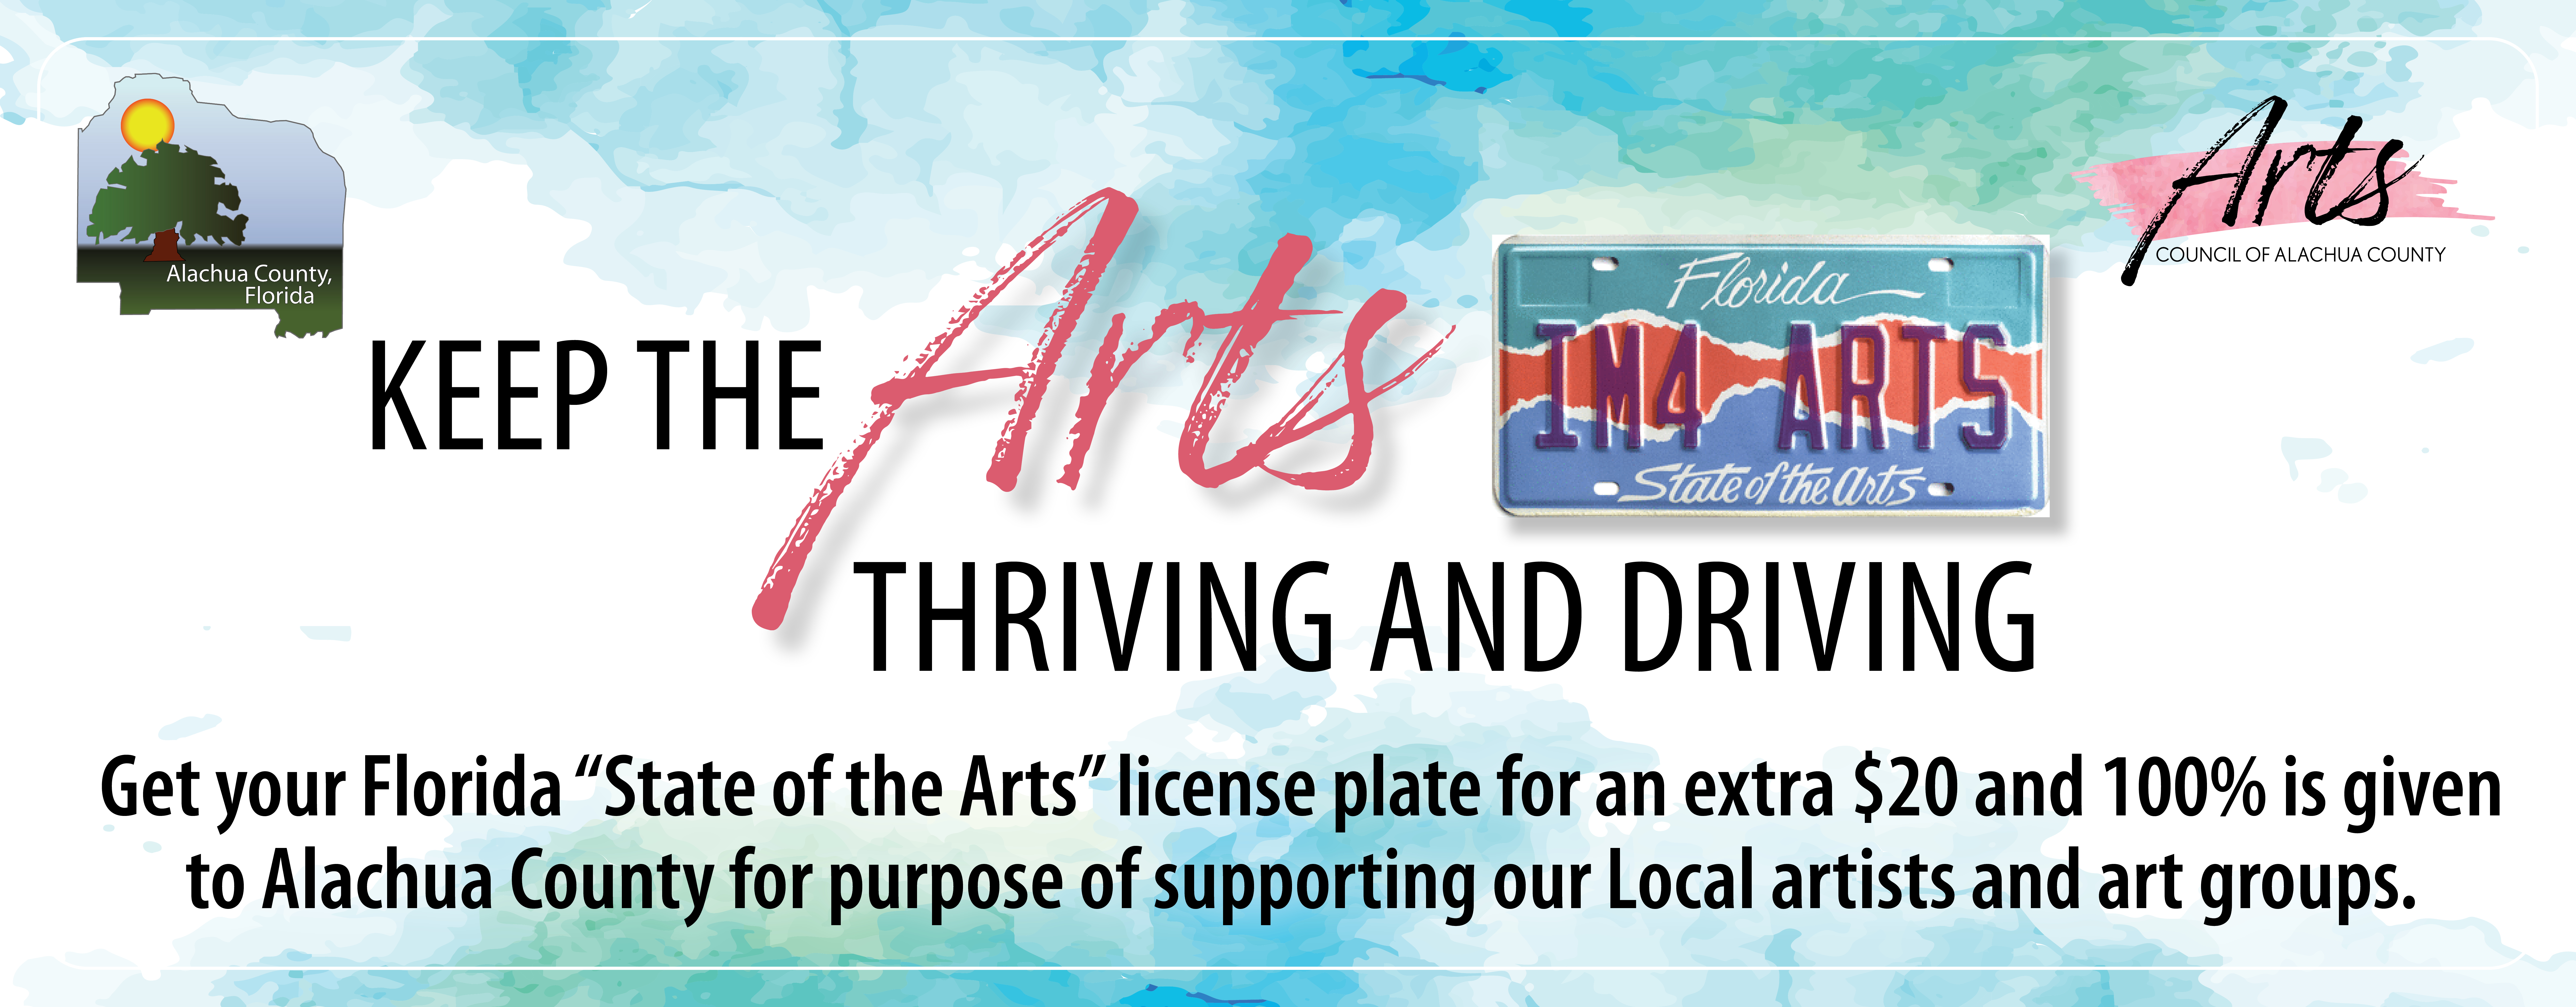 Keep the Arts Thriving and Driving. Get your Florida 